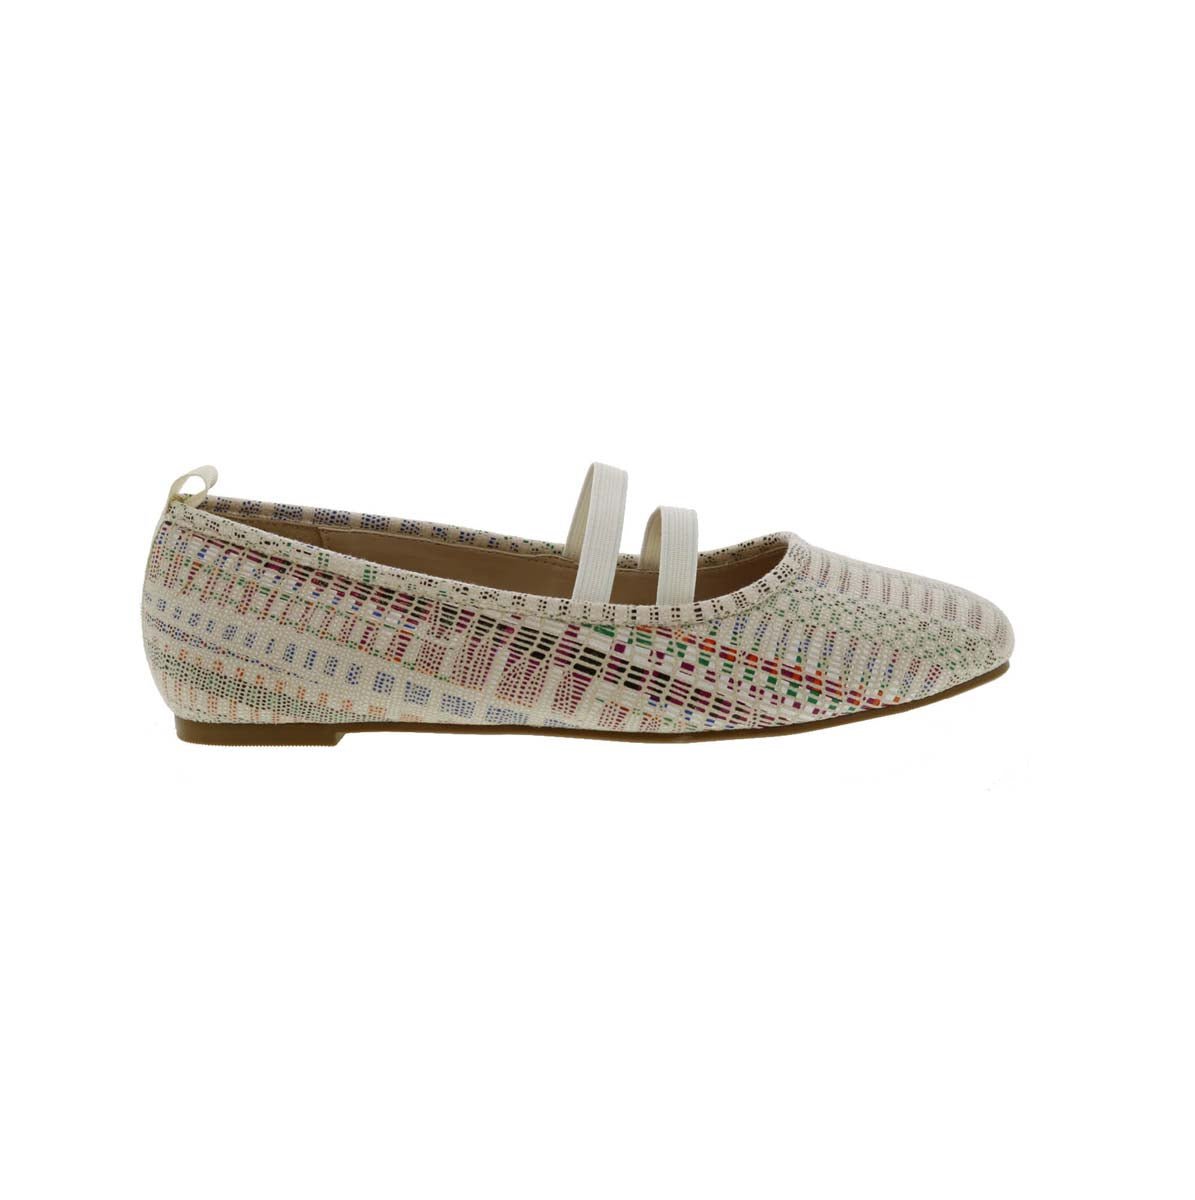 BELLINI SISSY WOMEN SLIP-ON MARY JANE SHOES IN WHITE MULTI TEXTILE - TLW Shoes